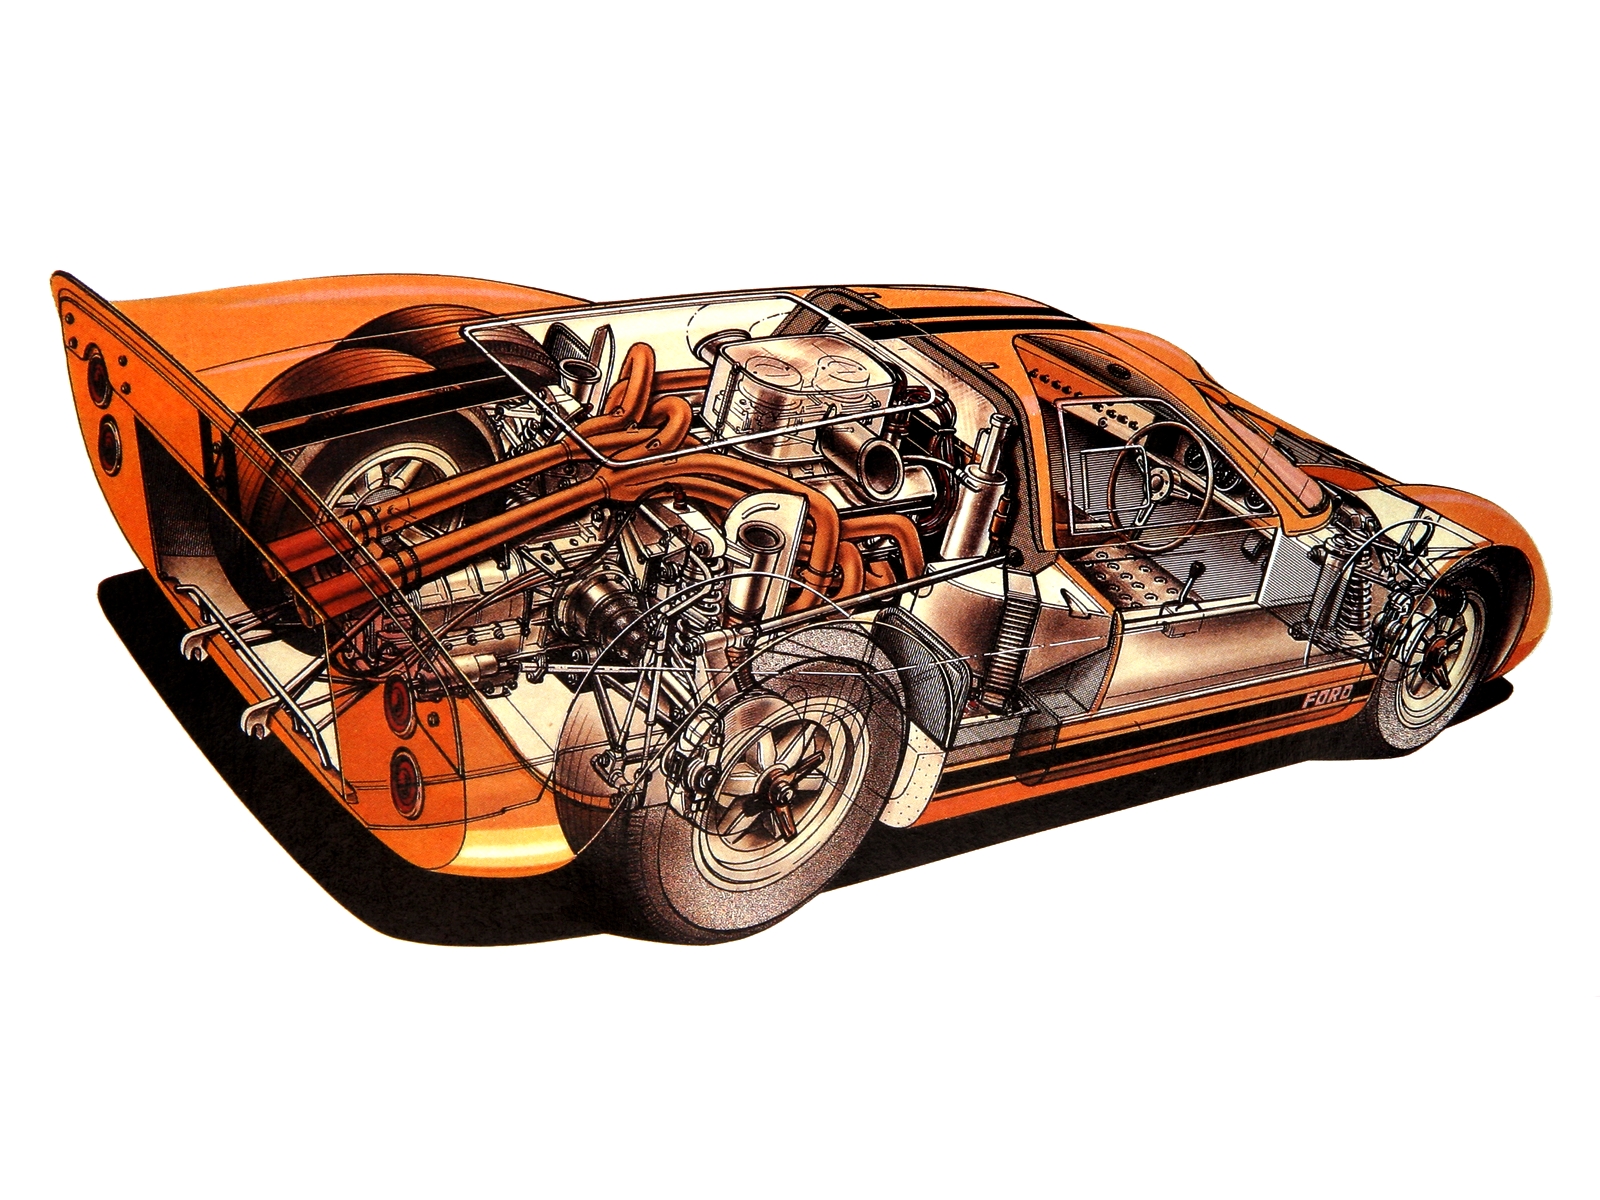 1967, Ford, Gt40, Mkiv, Race, Racing, Supercar, Interior, Engine Wallpaper